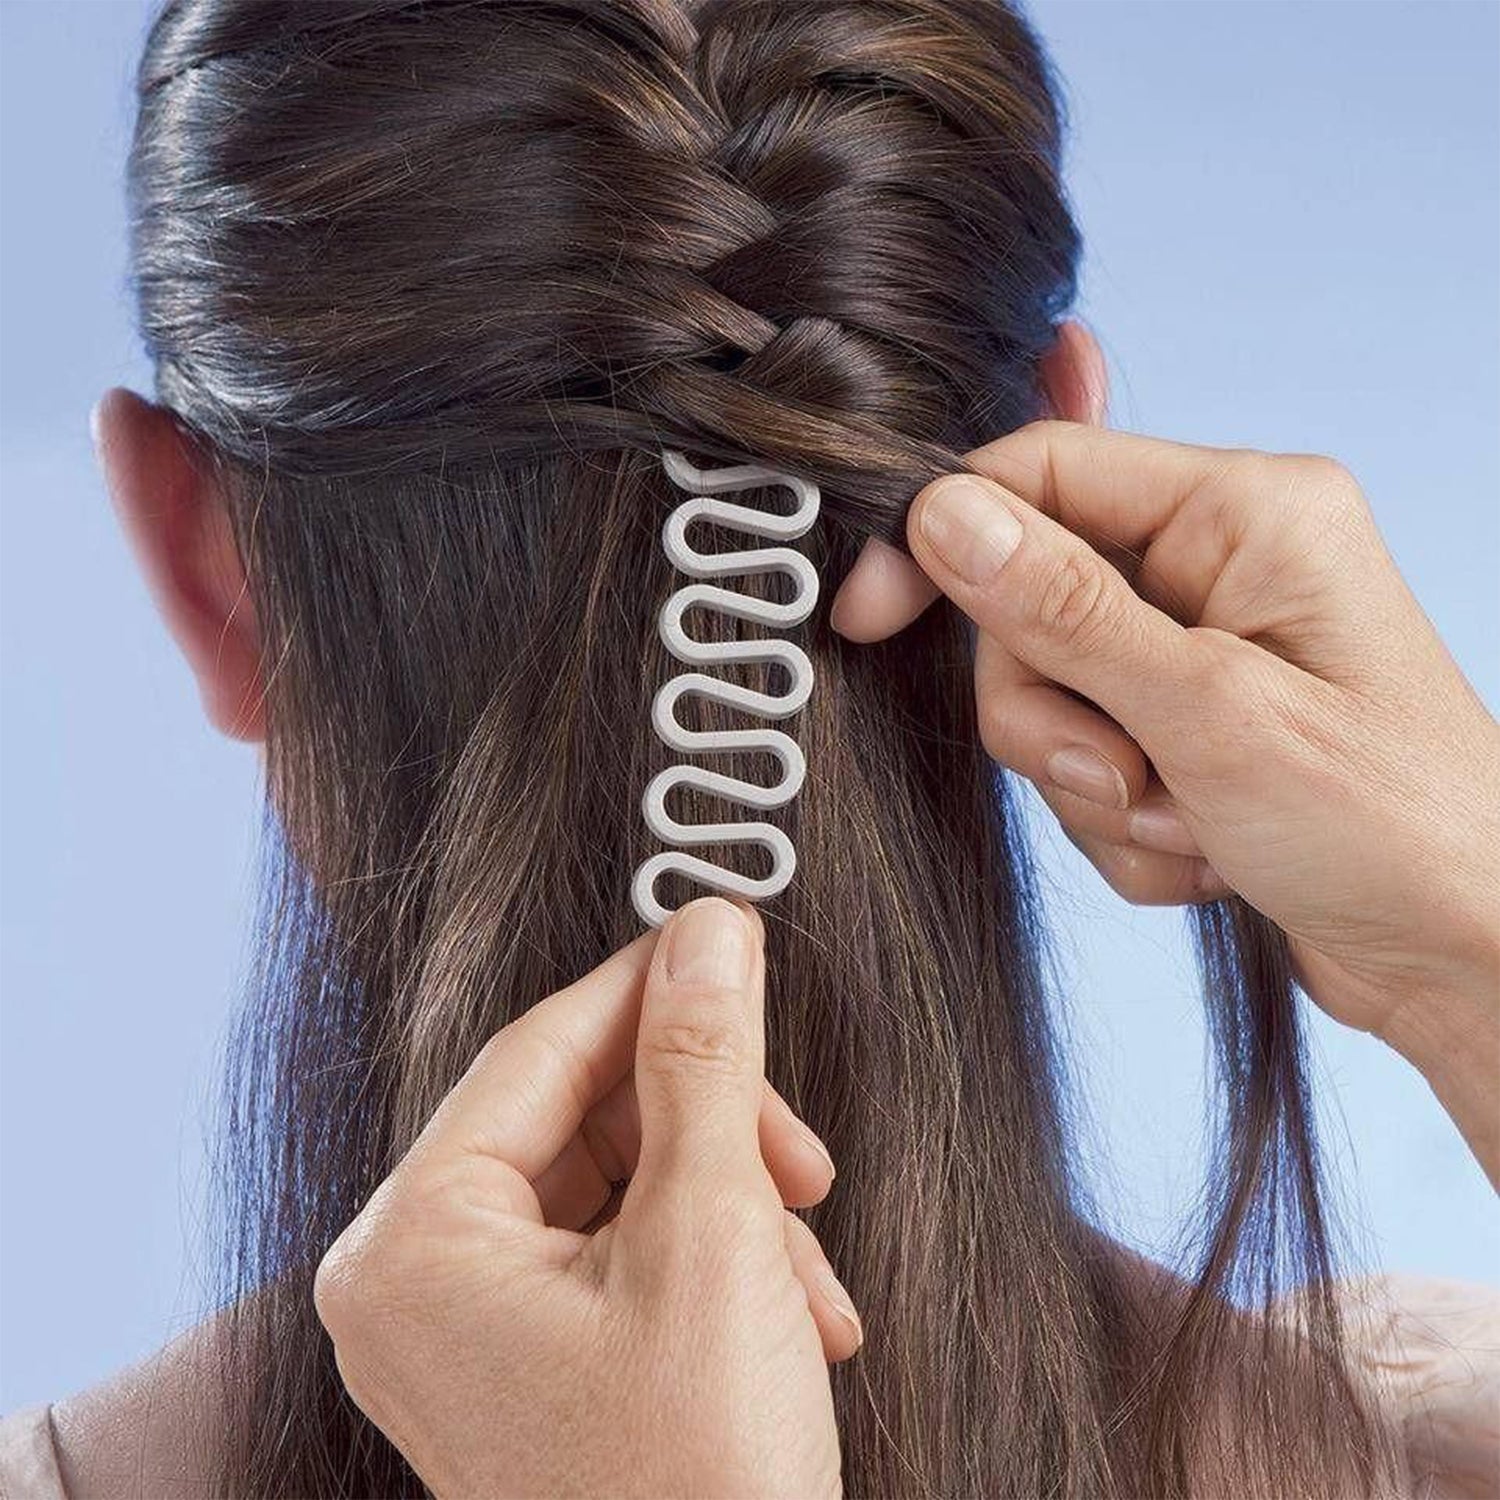 6147 Fishbone Bun Maker widely used by women’s for making their hair looks like a fish tail and all and it used in many kinds of places like household, parlours etc. DeoDap